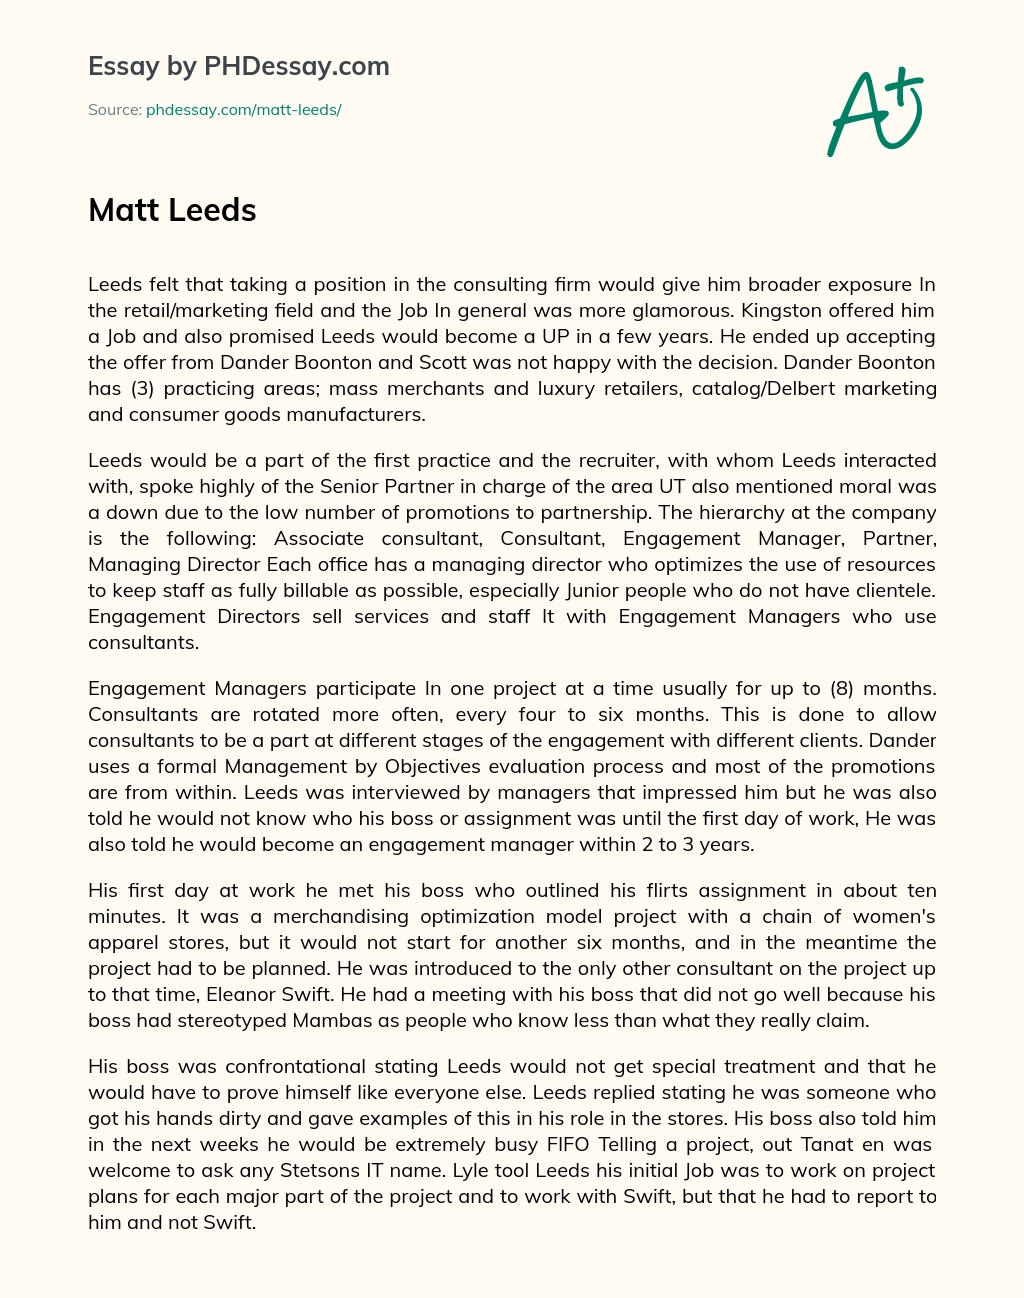 Leeds’ Decision to Join Dander Boonton: A Look at the Consulting Firm’s Hierarchy and Practices essay